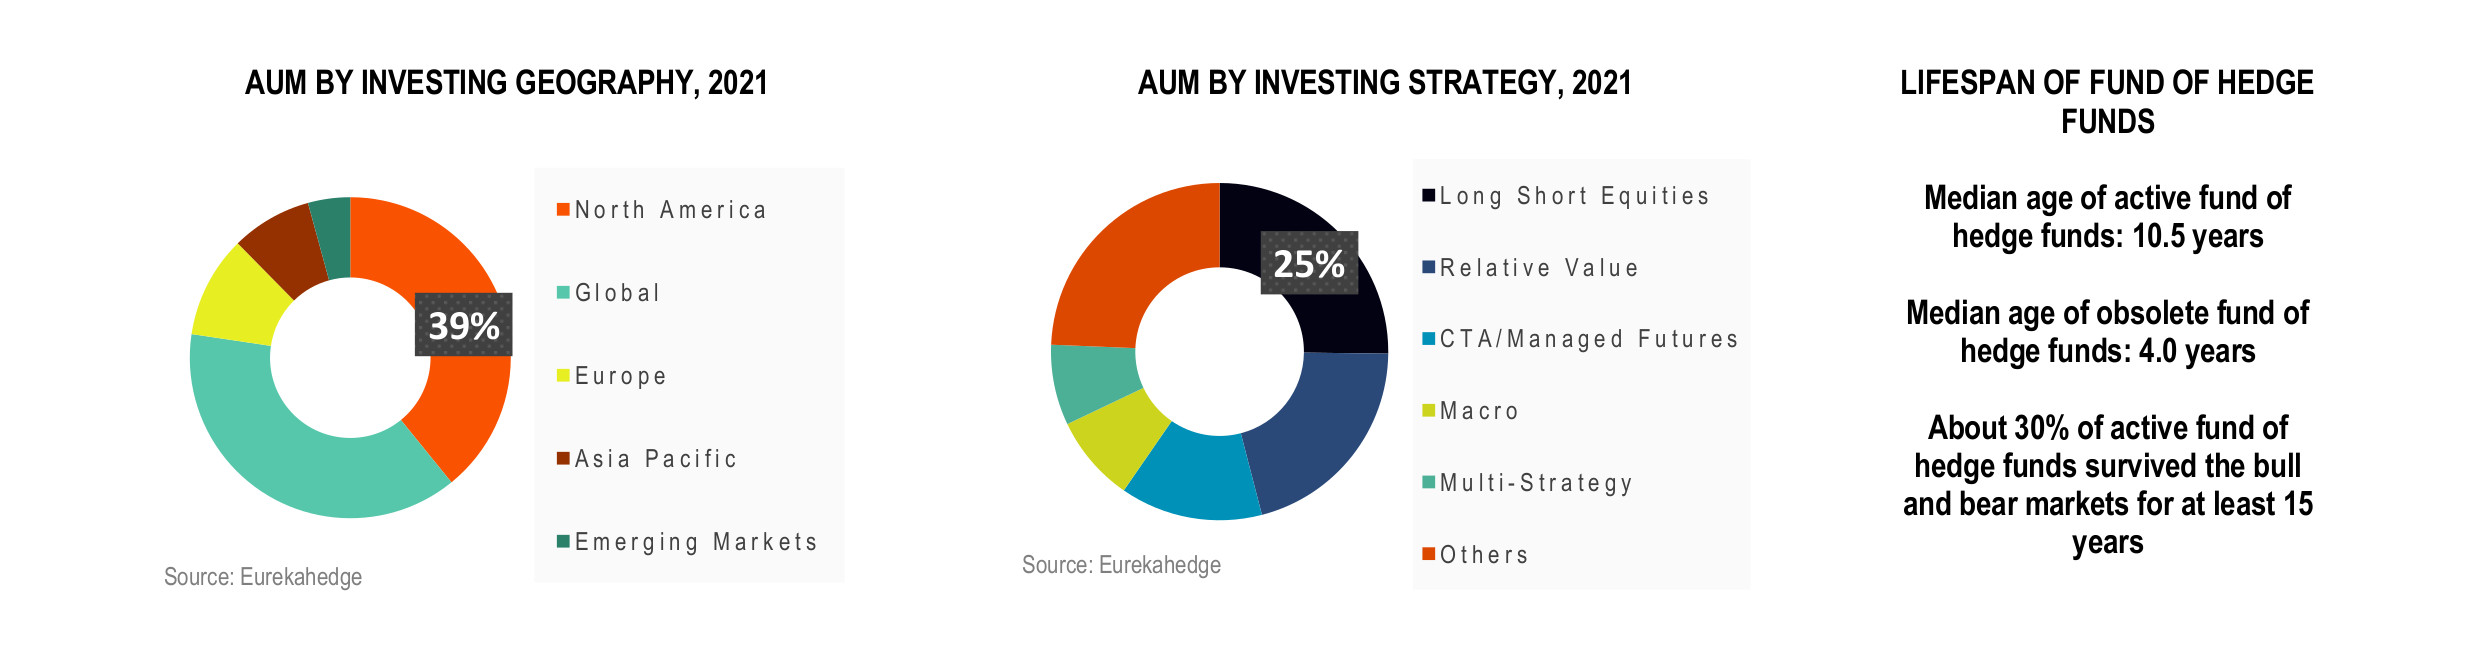 Fund of Hedge Funds Infographic March 2021 - AUM by investing geography and AUM by strategy